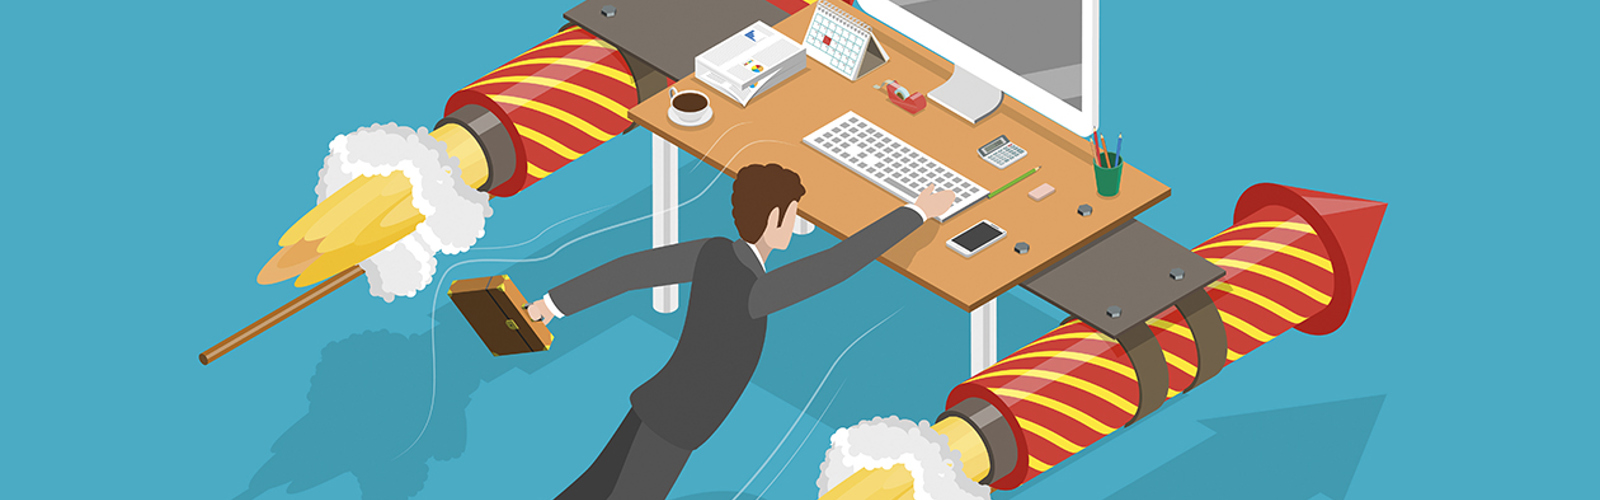 Illustration of a manager and their desk taking flight – with rockets